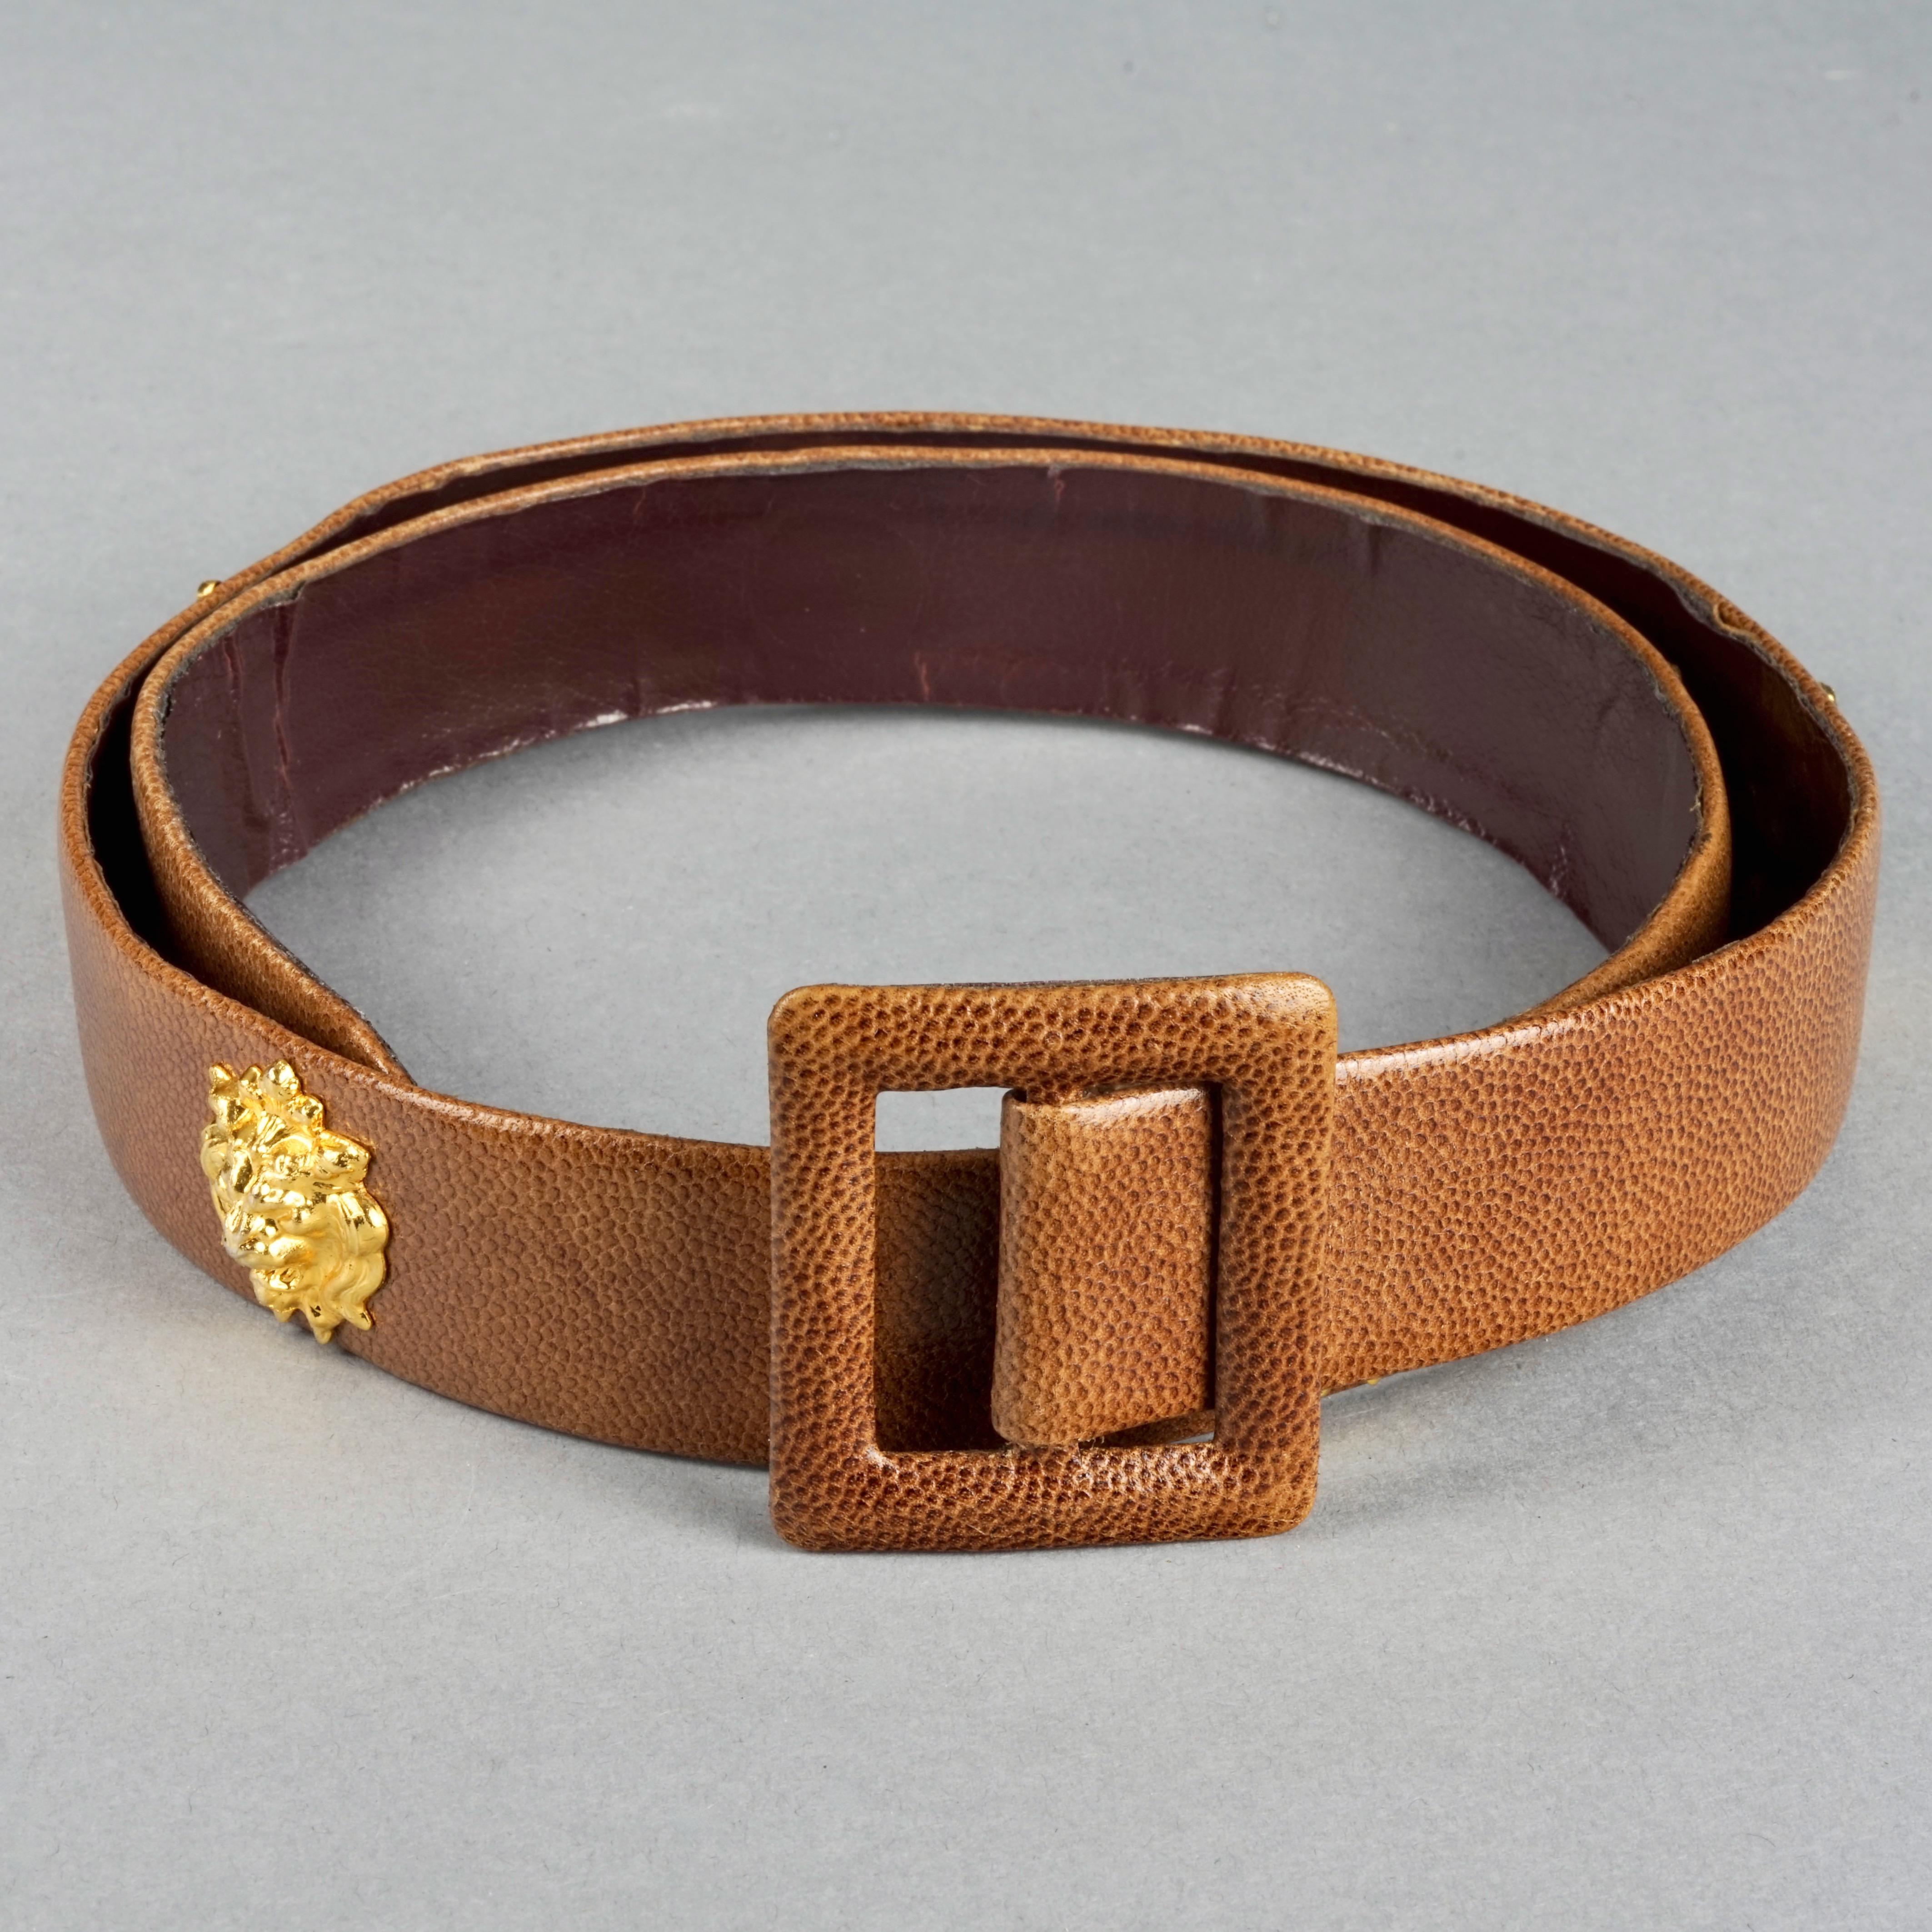 Vintage CHRISTIAN DIOR Lion Head Charms Brown Leather Belt In Good Condition For Sale In Kingersheim, Alsace